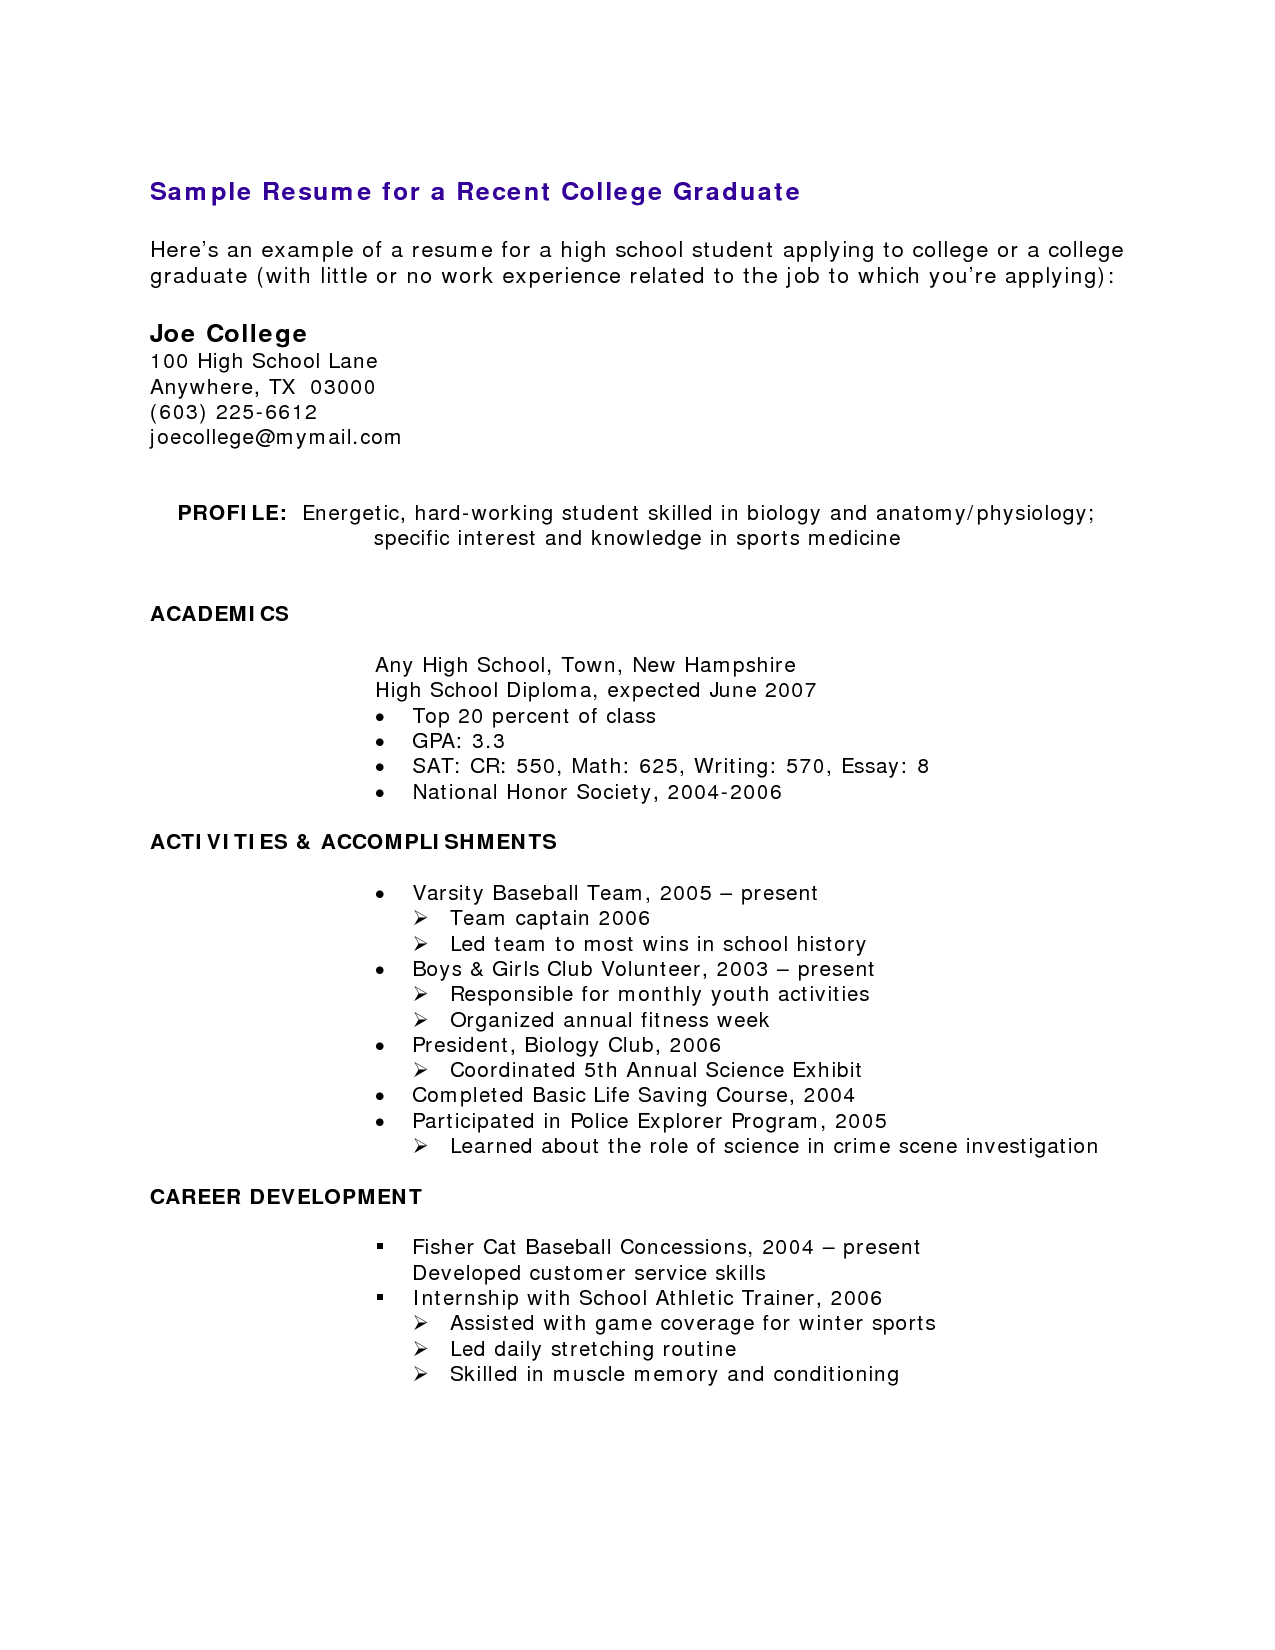 resumes samples for high school students with no experience http